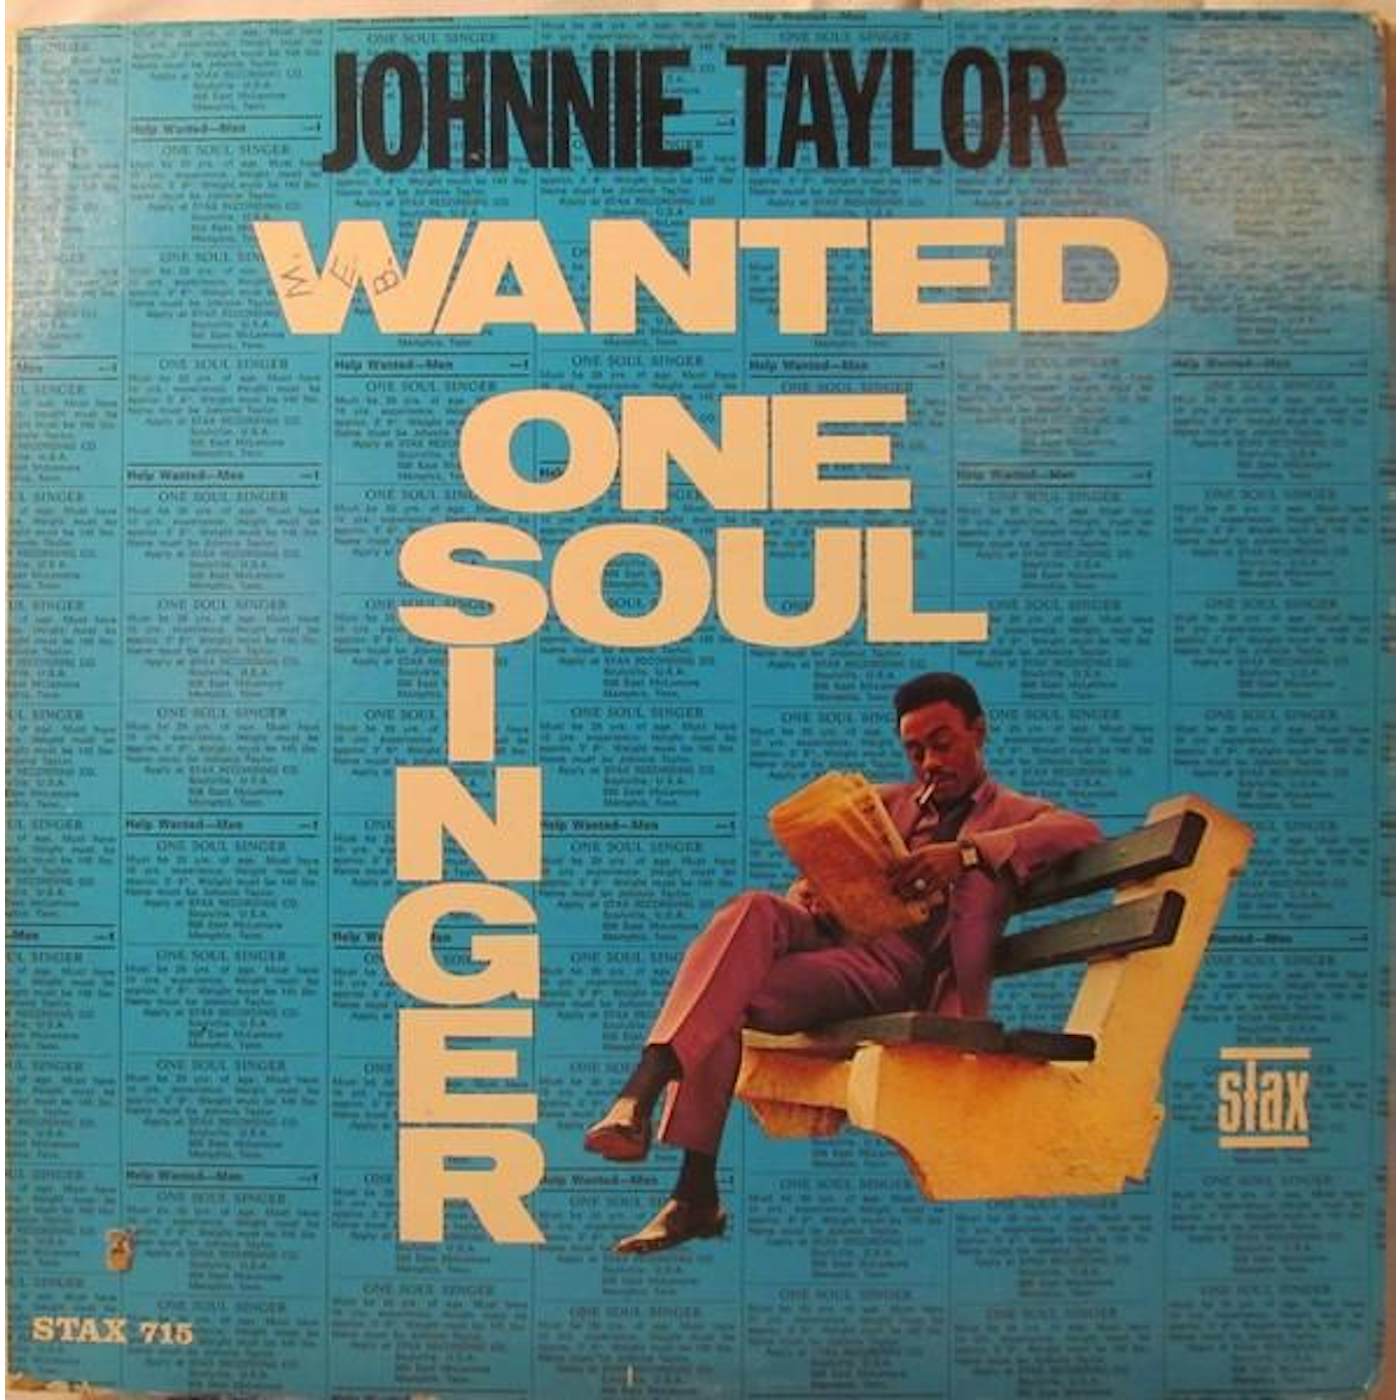 Johnnie Taylor WANTED: ONE SOUL SINGER CD